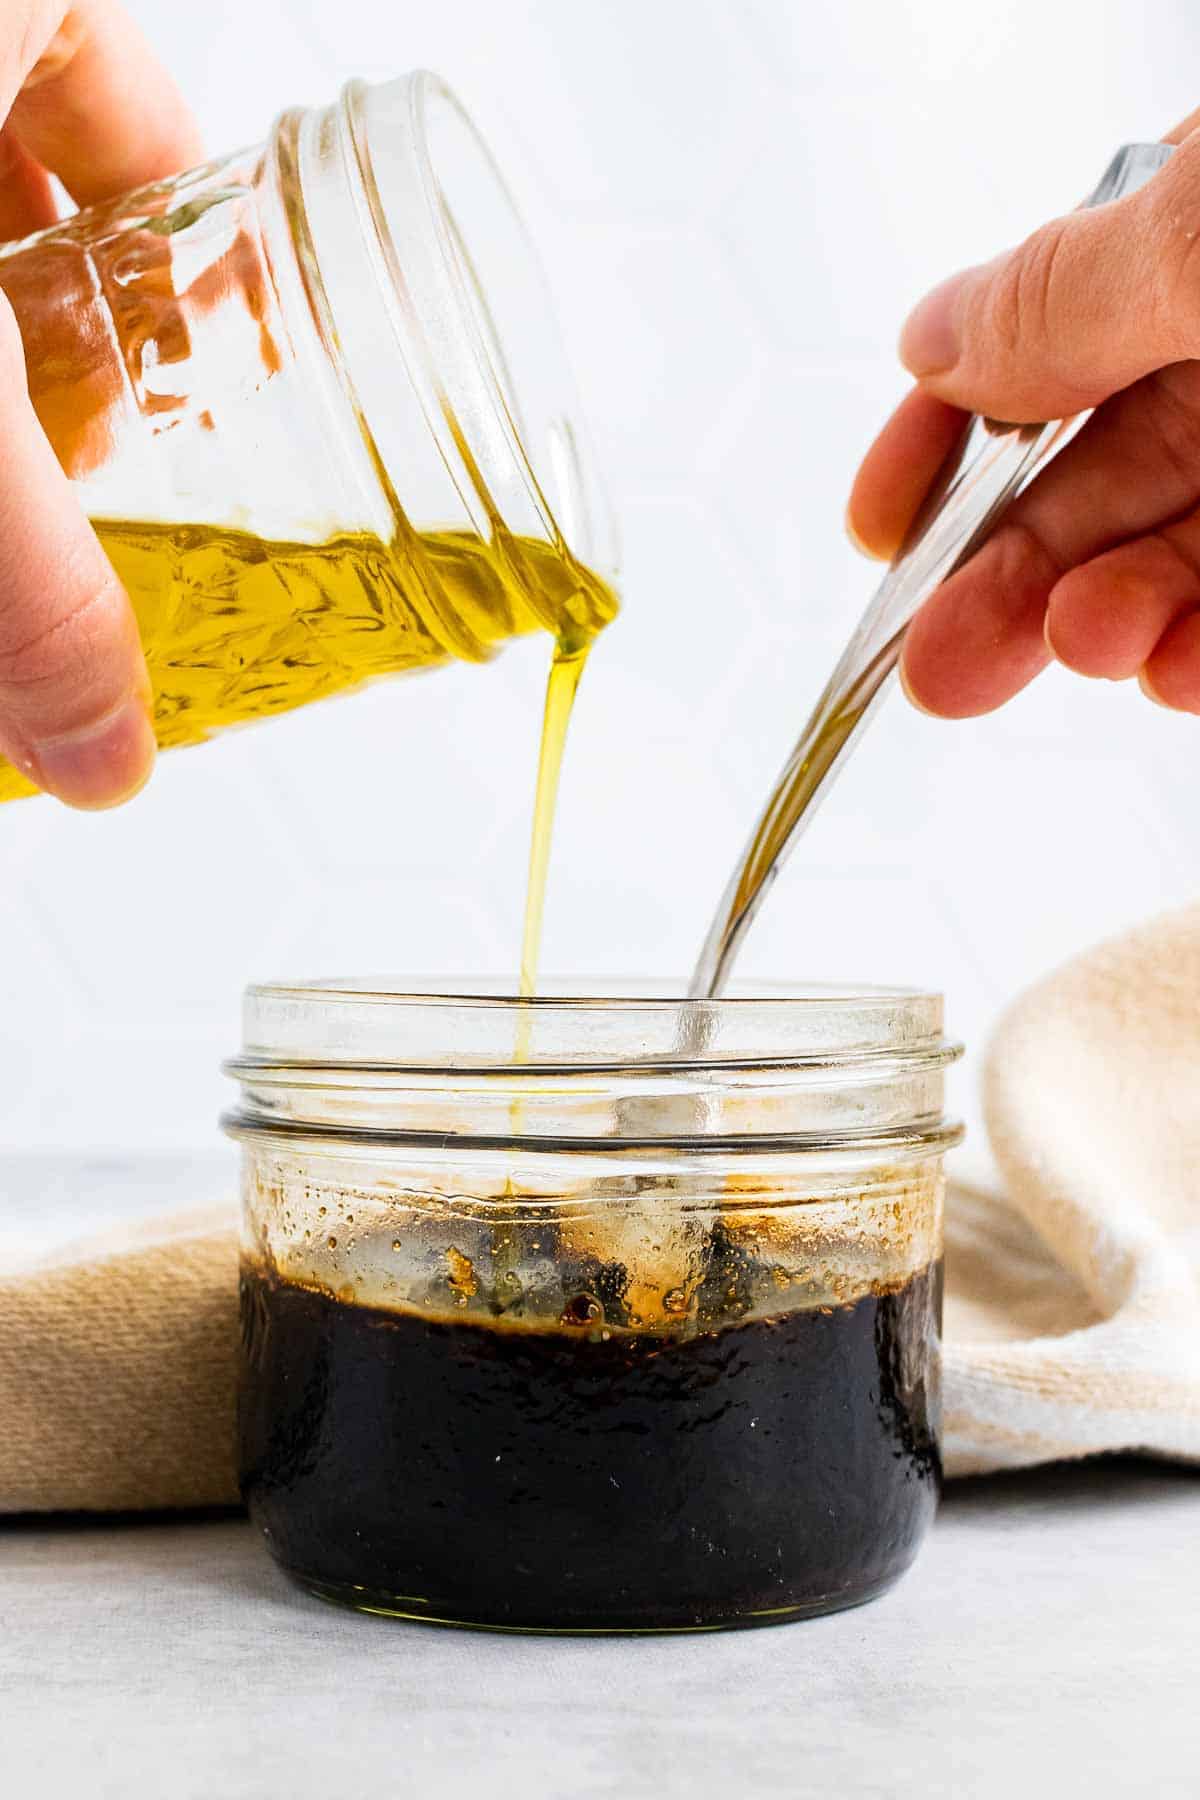 Hand pouring olive oil into glass with the other ingredients